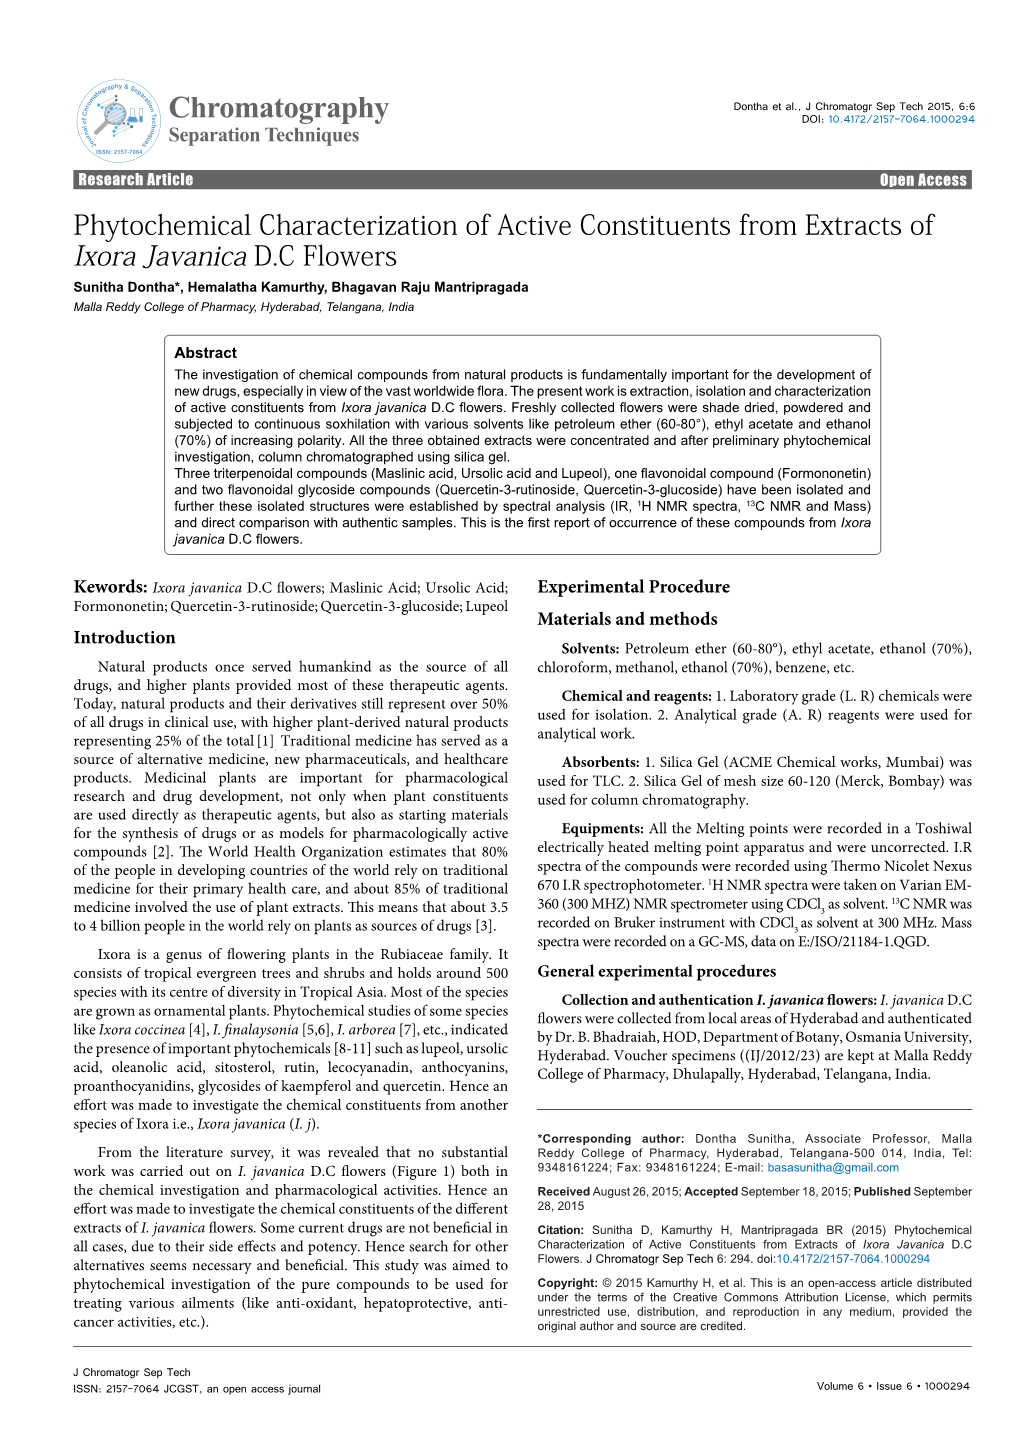 Phytochemical Characterization of Active Constituents from Extracts Of